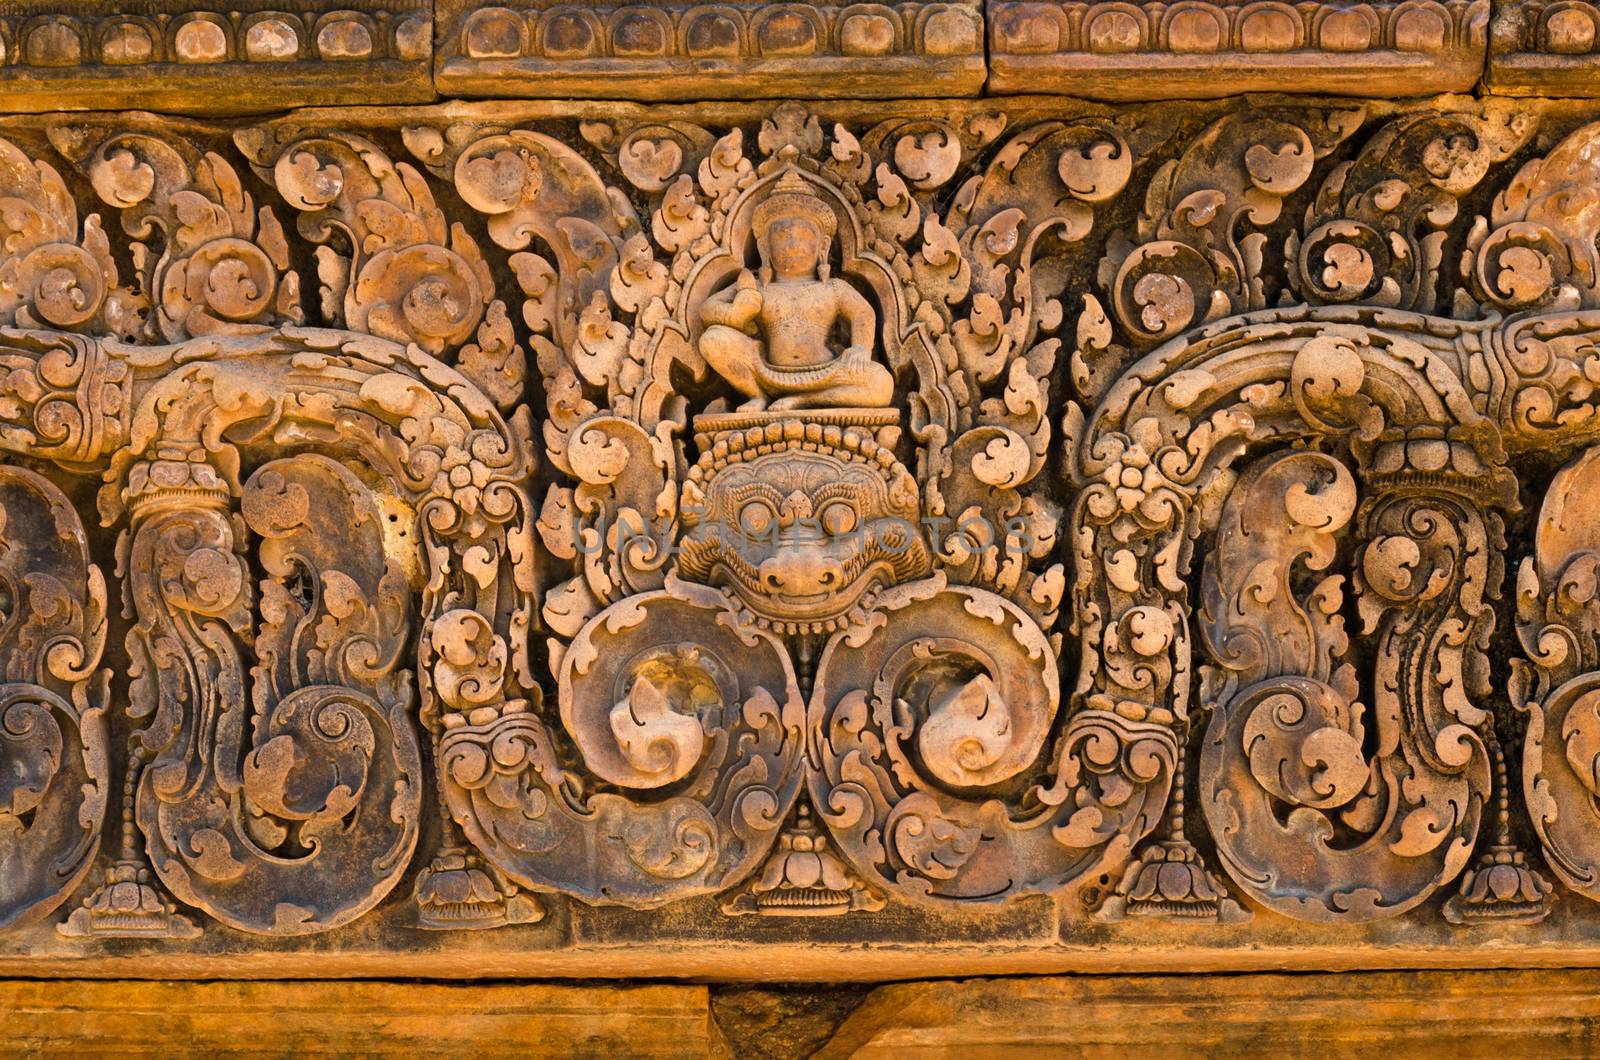 Carving details at Banteay Srei temple, Siem Reap by siraanamwong